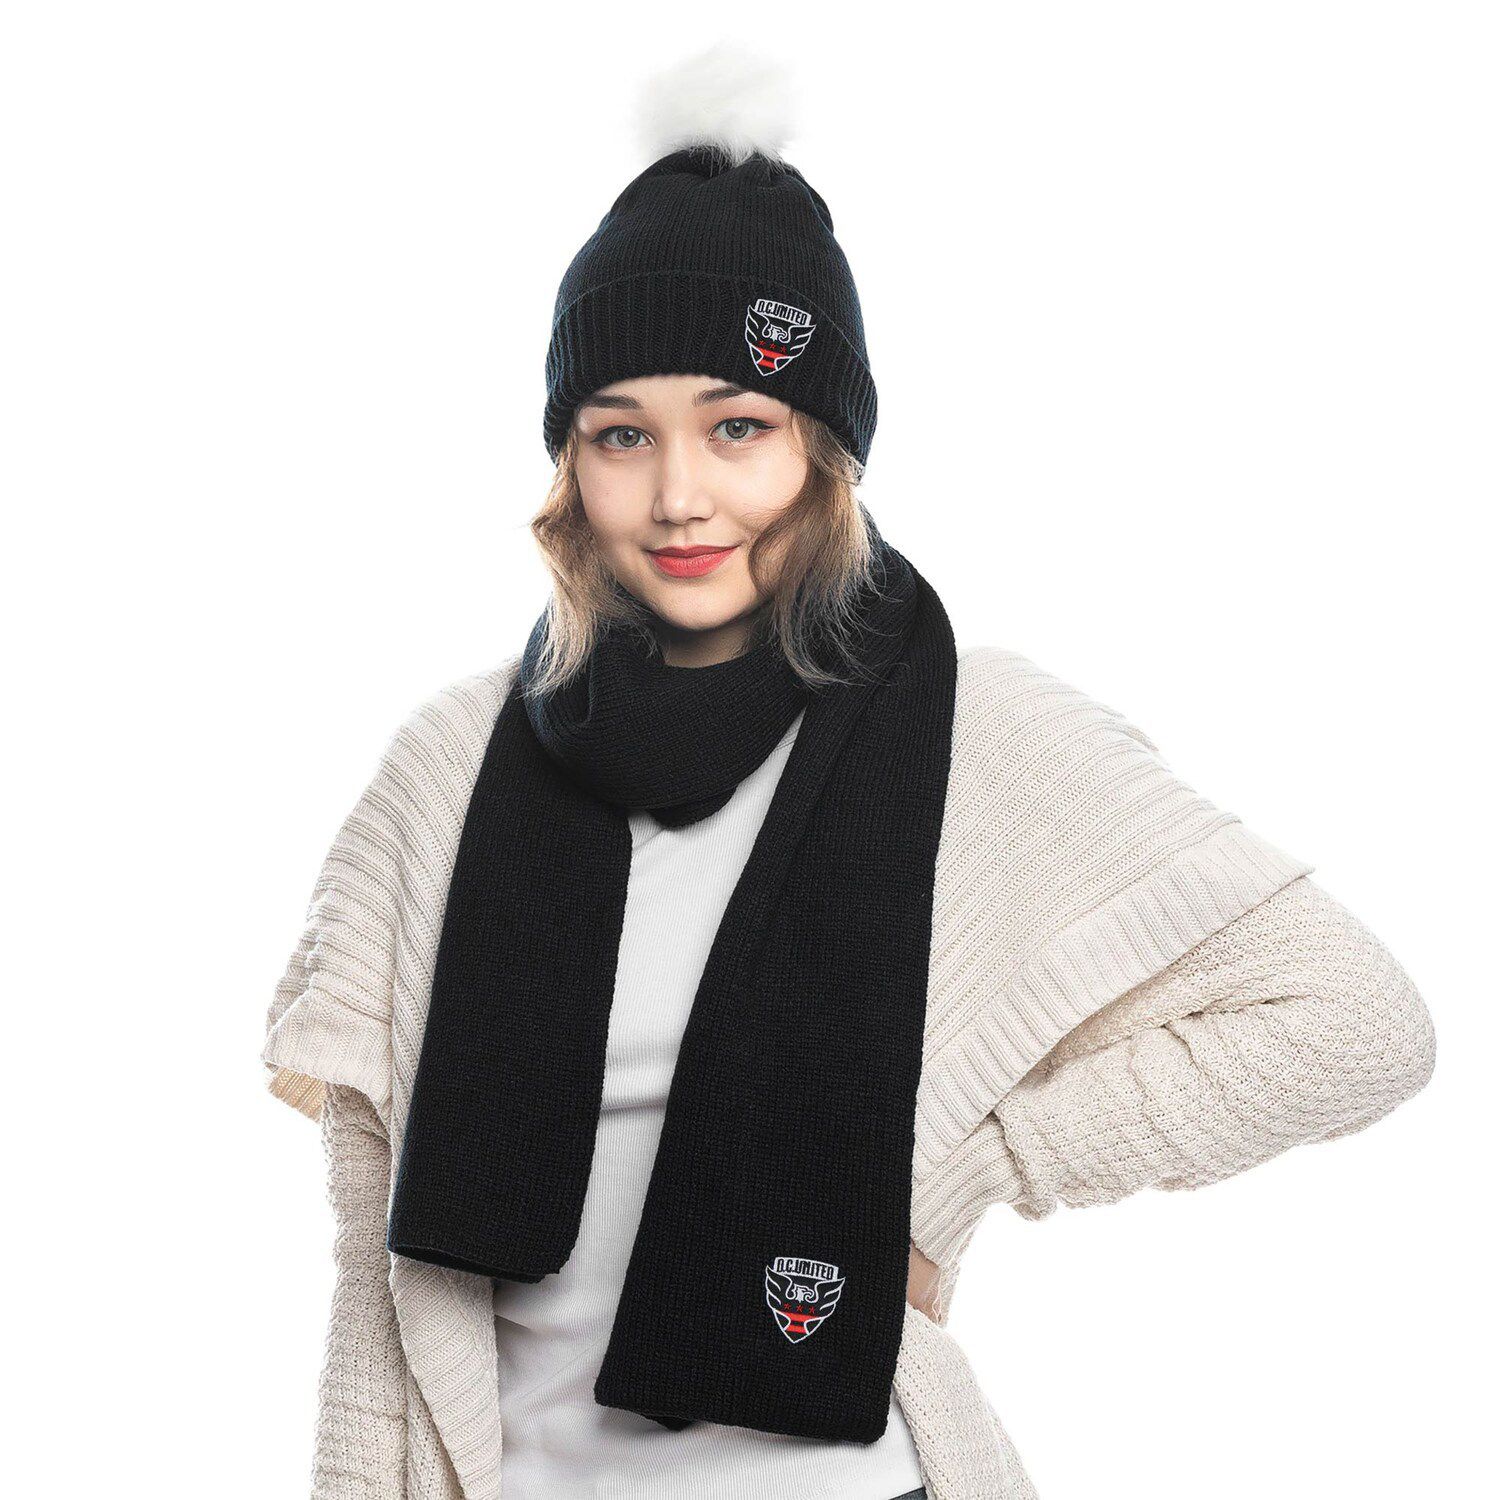 Image for Unbranded ZooZatz D.C. United Fuzzy Cuffed Pom Knit Hat and Scarf Set at Kohl's.